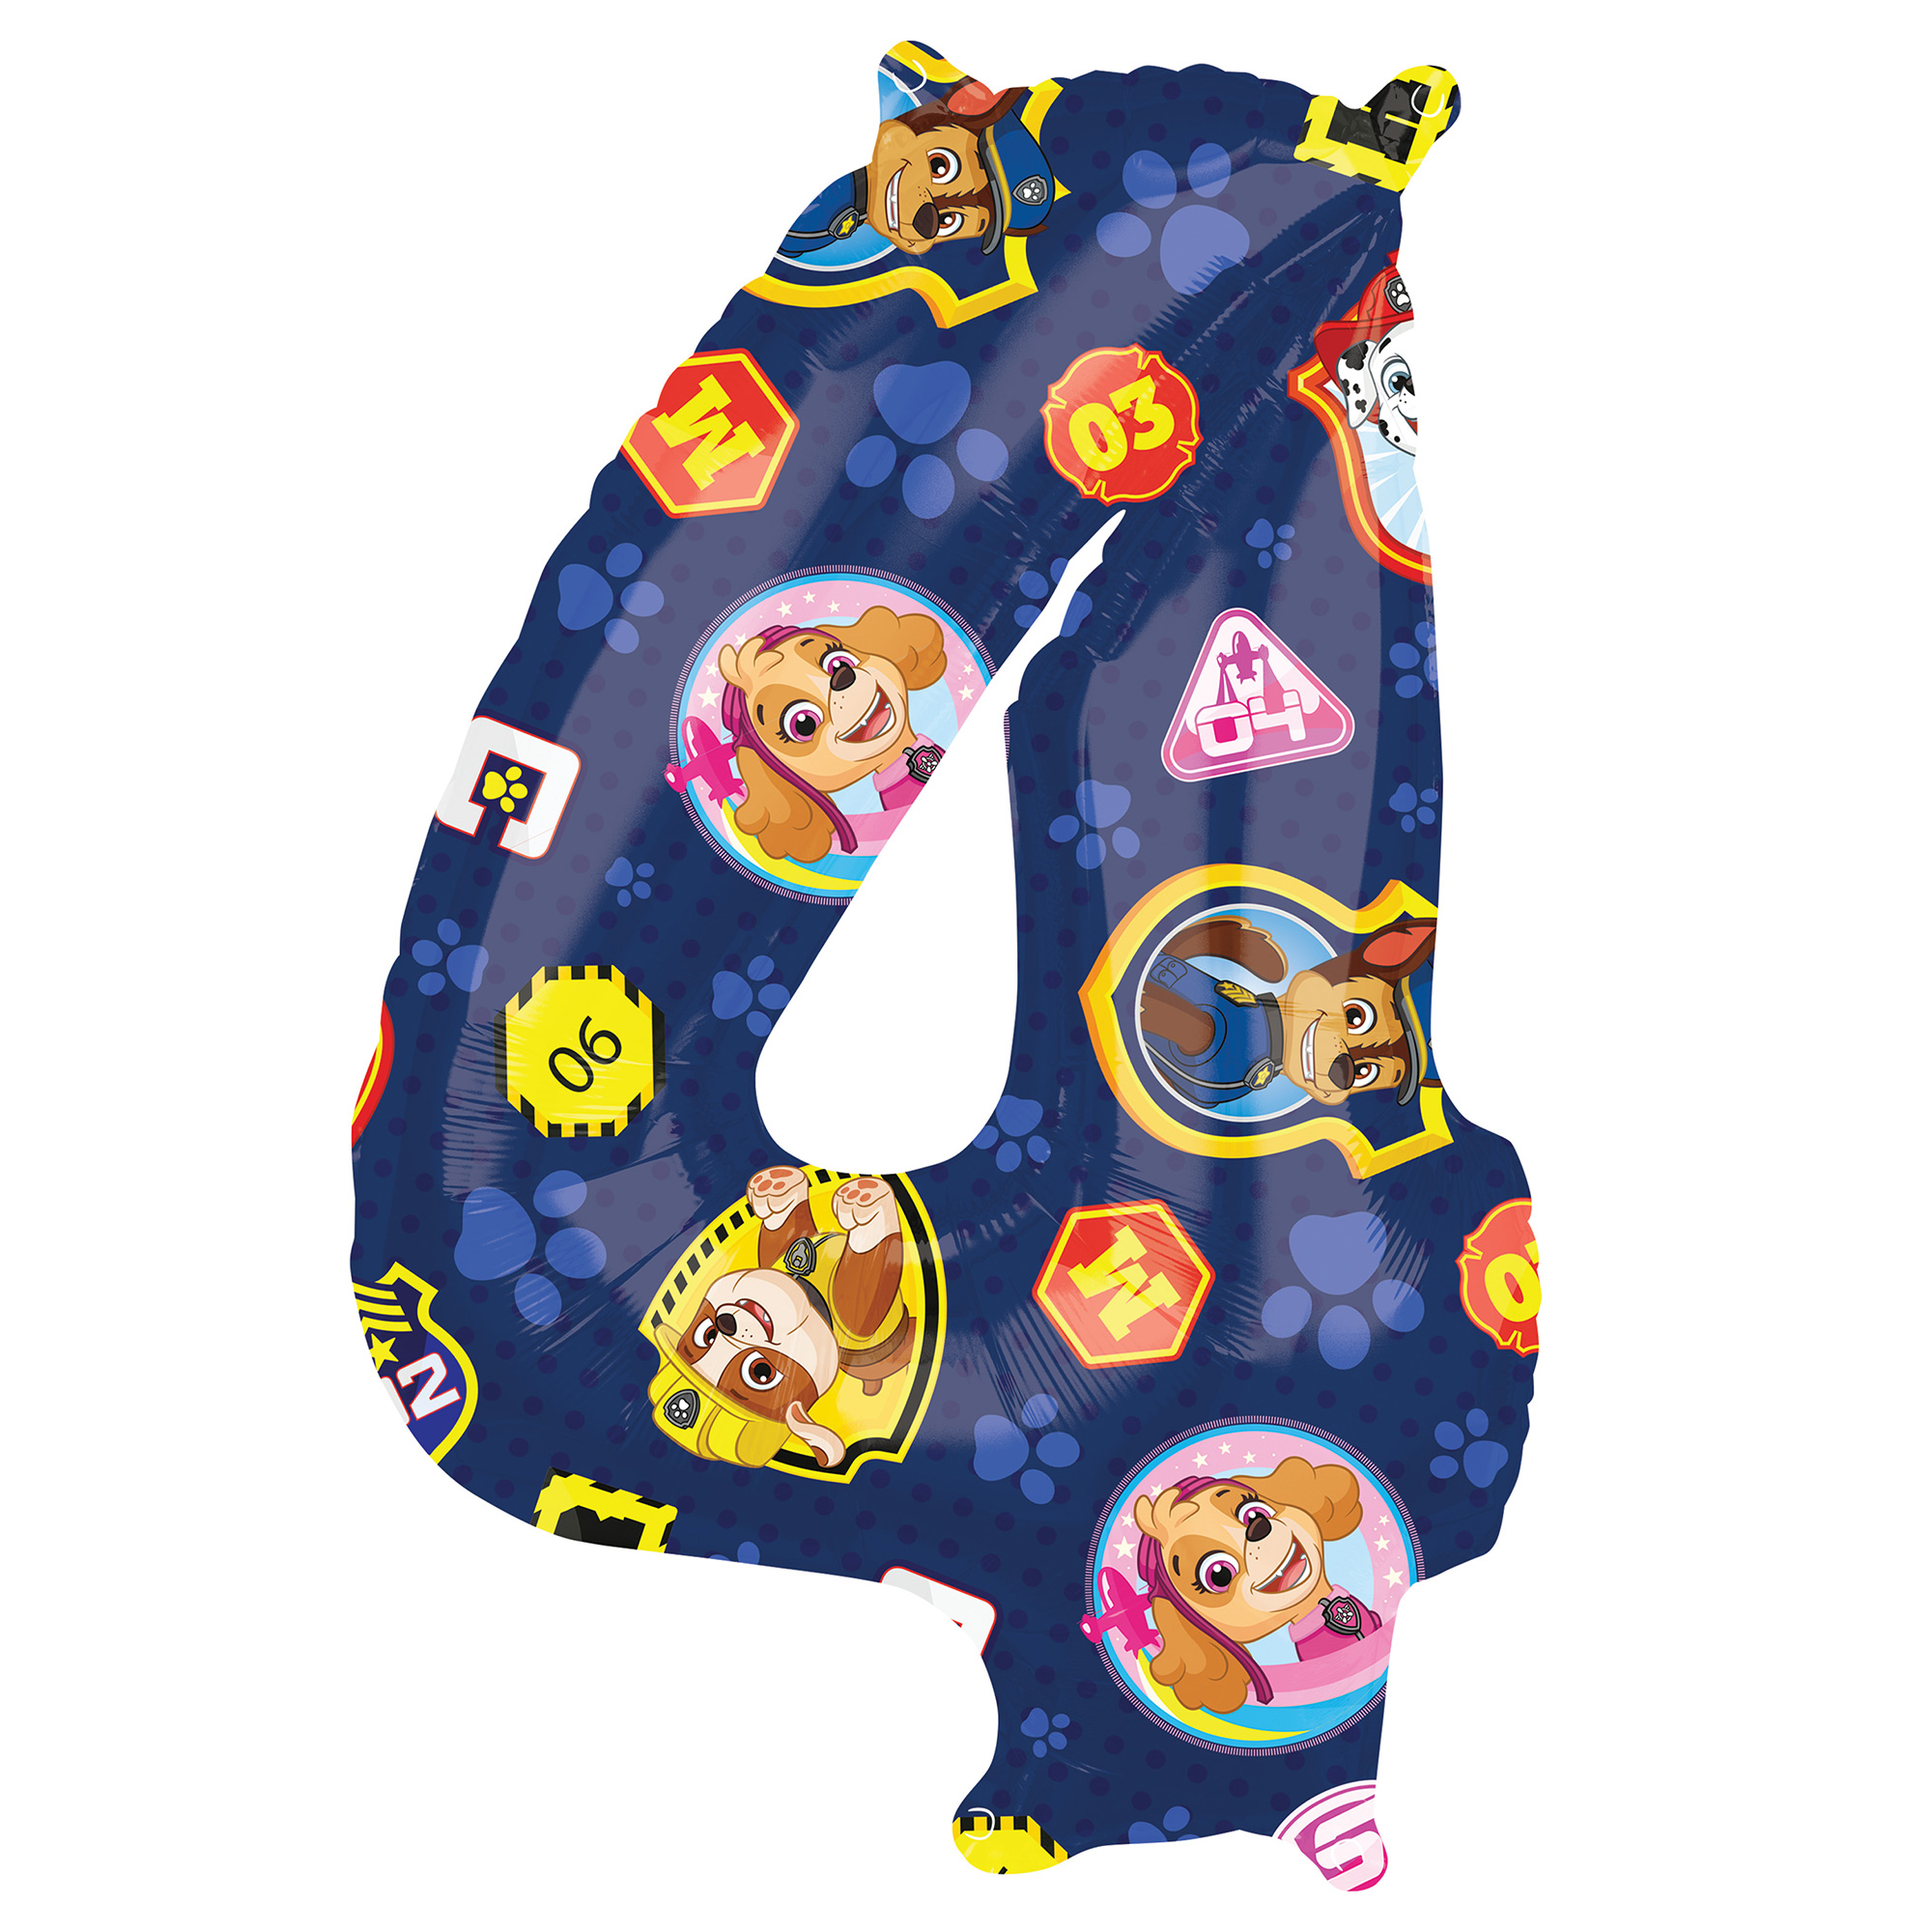 Paw Patrol Number 4 34-Inch Foil Helium Balloon